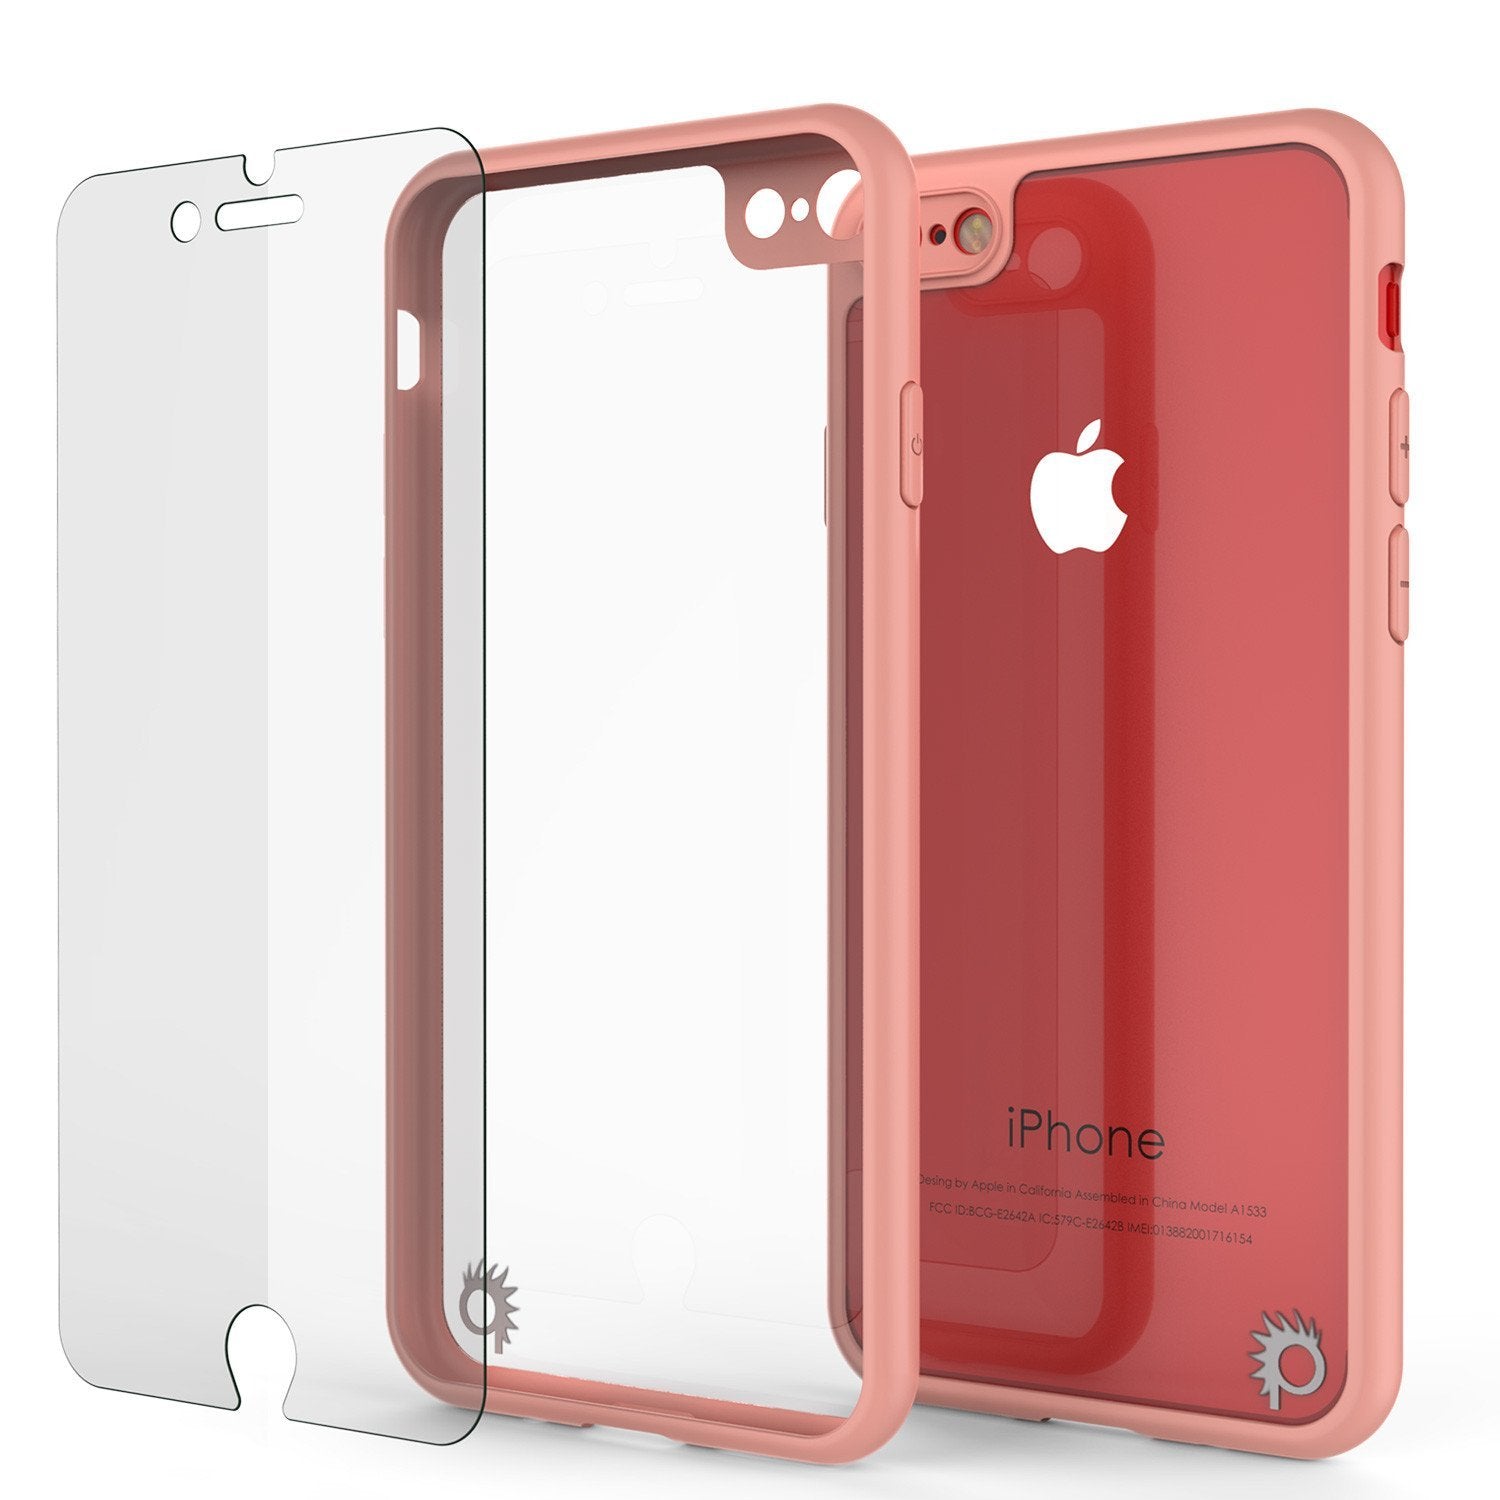 iPhone8 Case [MASK Series] [PINK] Full Body Hybrid Dual Layer TPU Cover W/ protective Tempered Glass Screen Protector